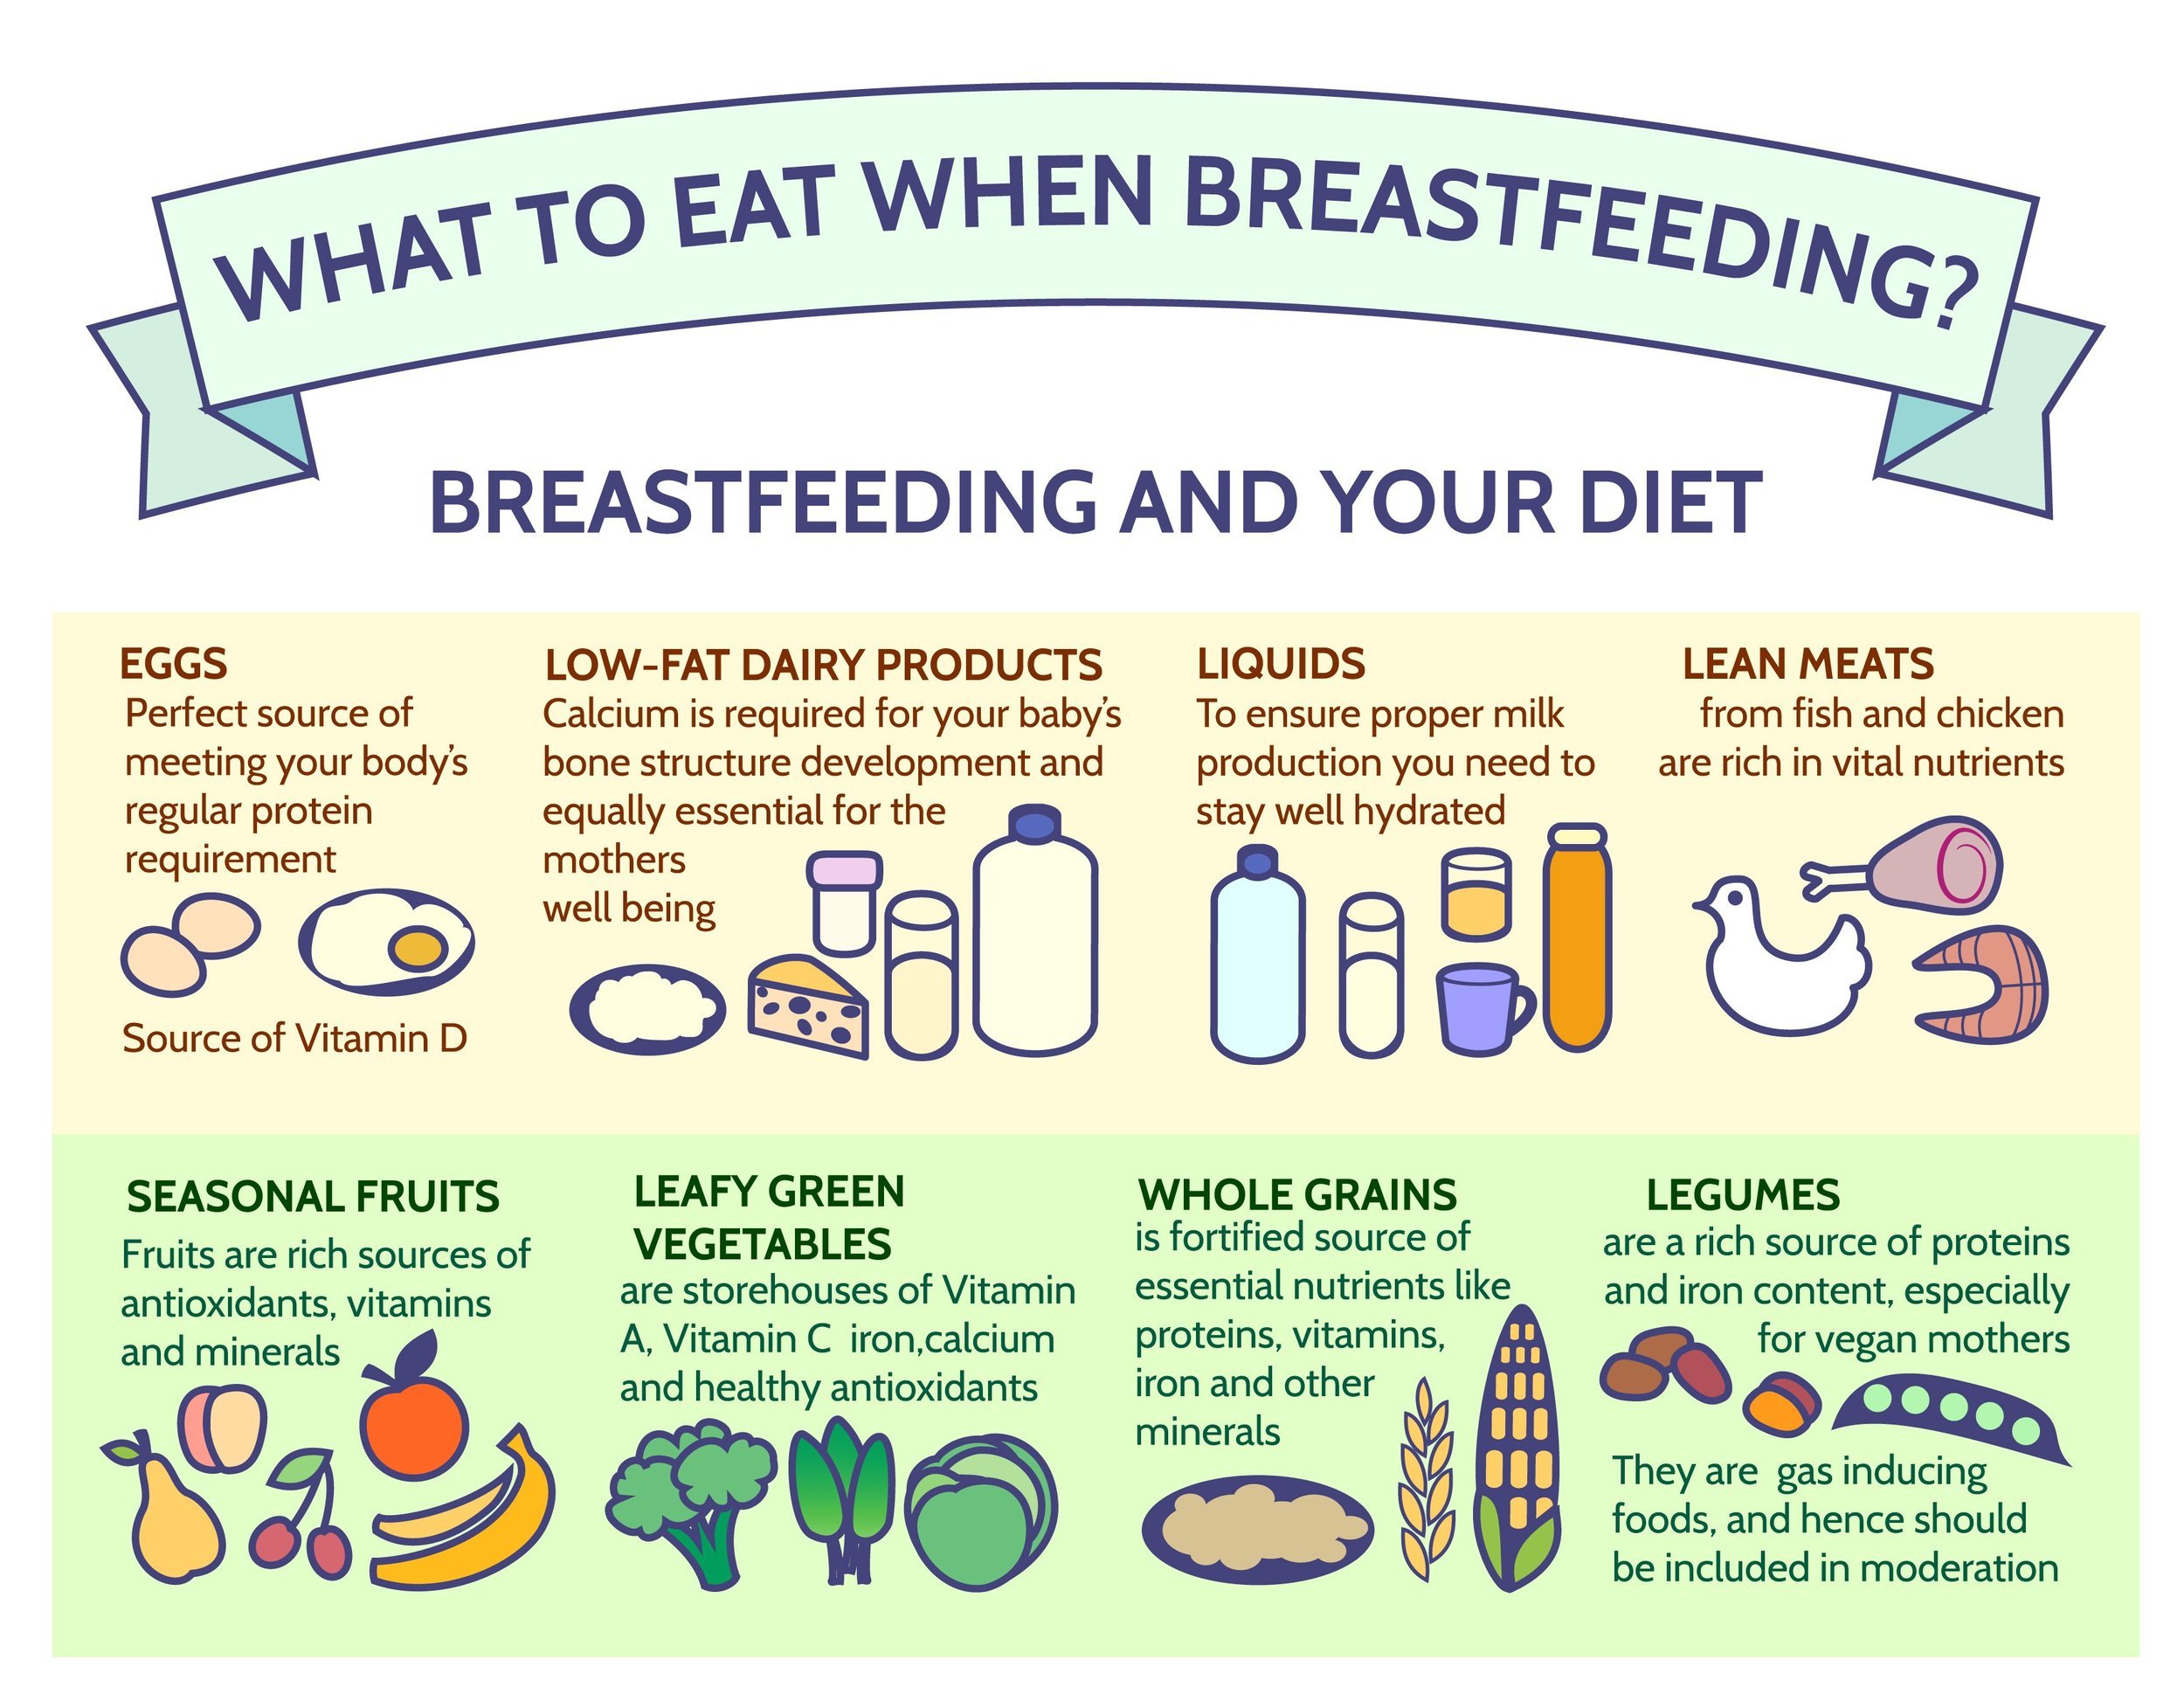 Protein intake for breastfeeding mothers